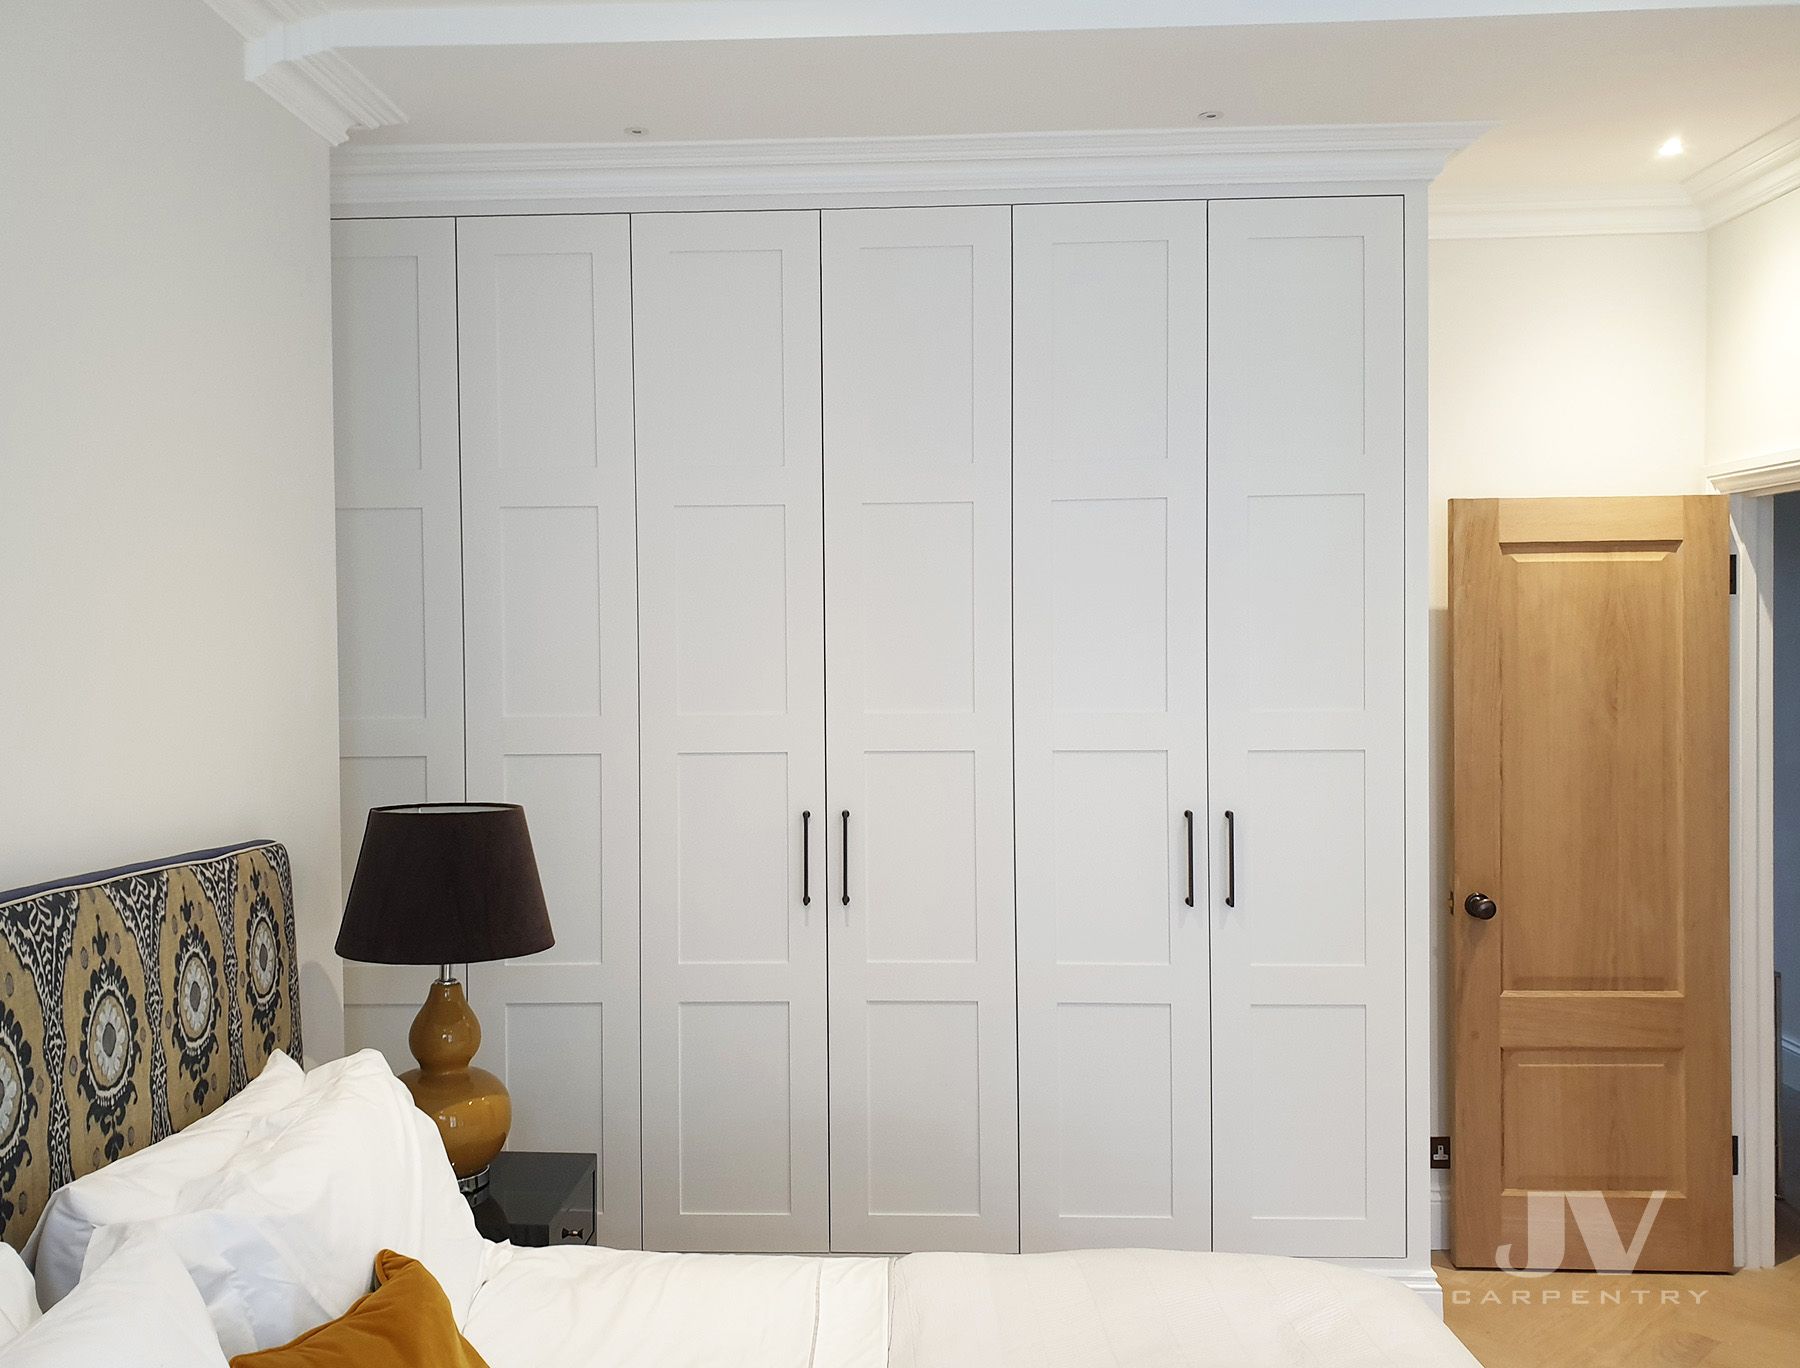 Fitted Wardrobes | Bespoke Bedroom Furniture | Jv Carpentry Intended For Built In Wardrobes (View 3 of 15)